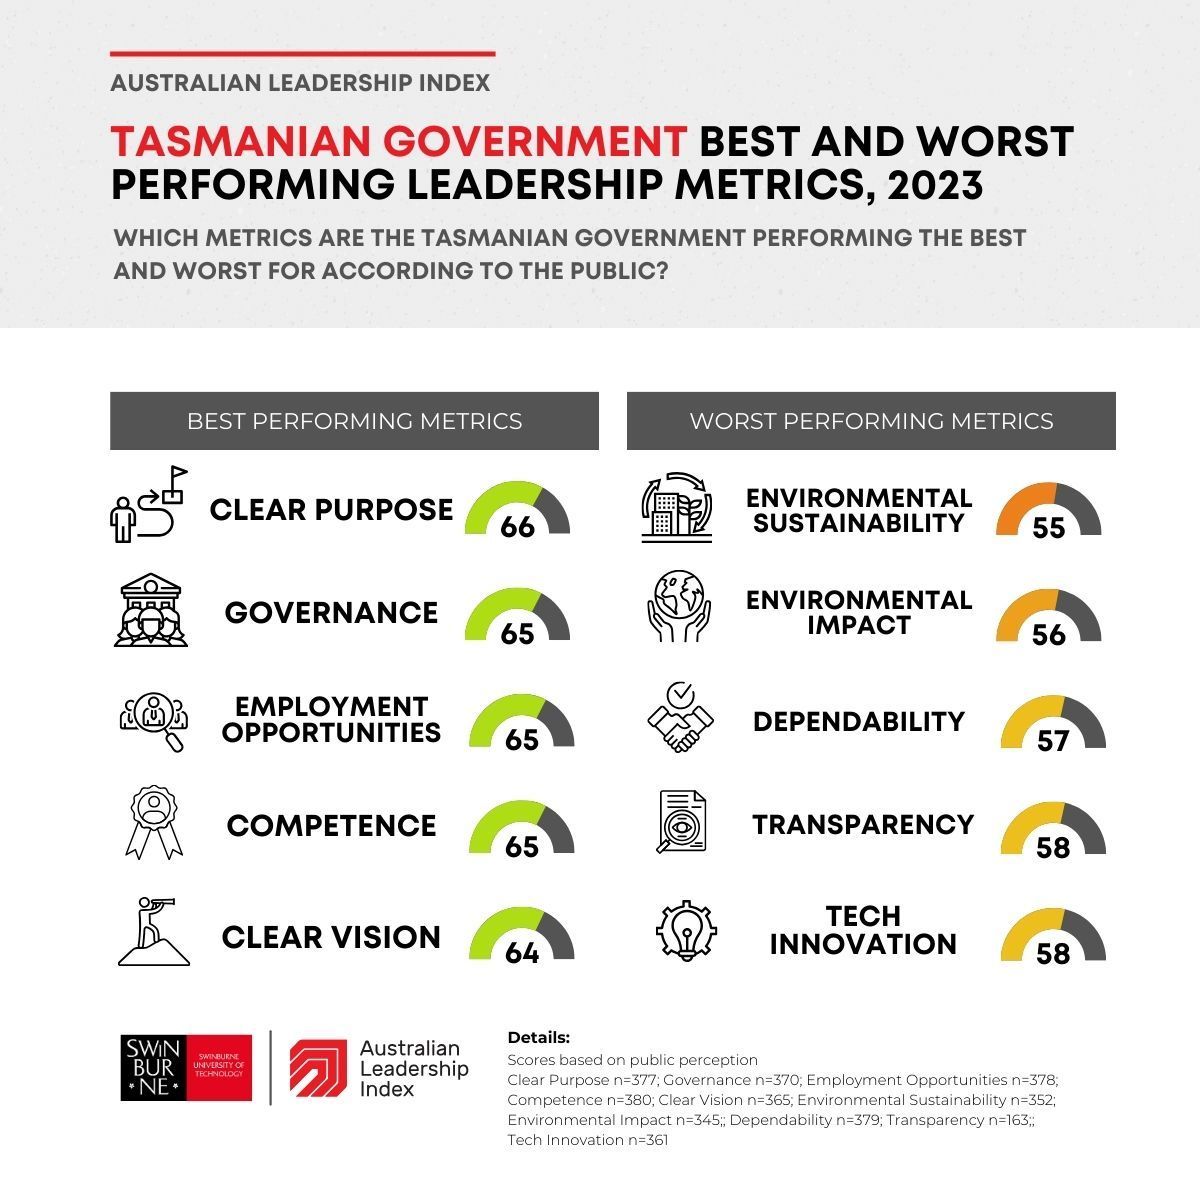 Tasmanians head to the polls tomorrow and the issues below will likely be on their mind. Overall leadership sits at 60/100, the worst of any state, indicating a level of dissatisfaction with the current government. More data 👉 buff.ly/3Qw862R #tasgov #tasvotes